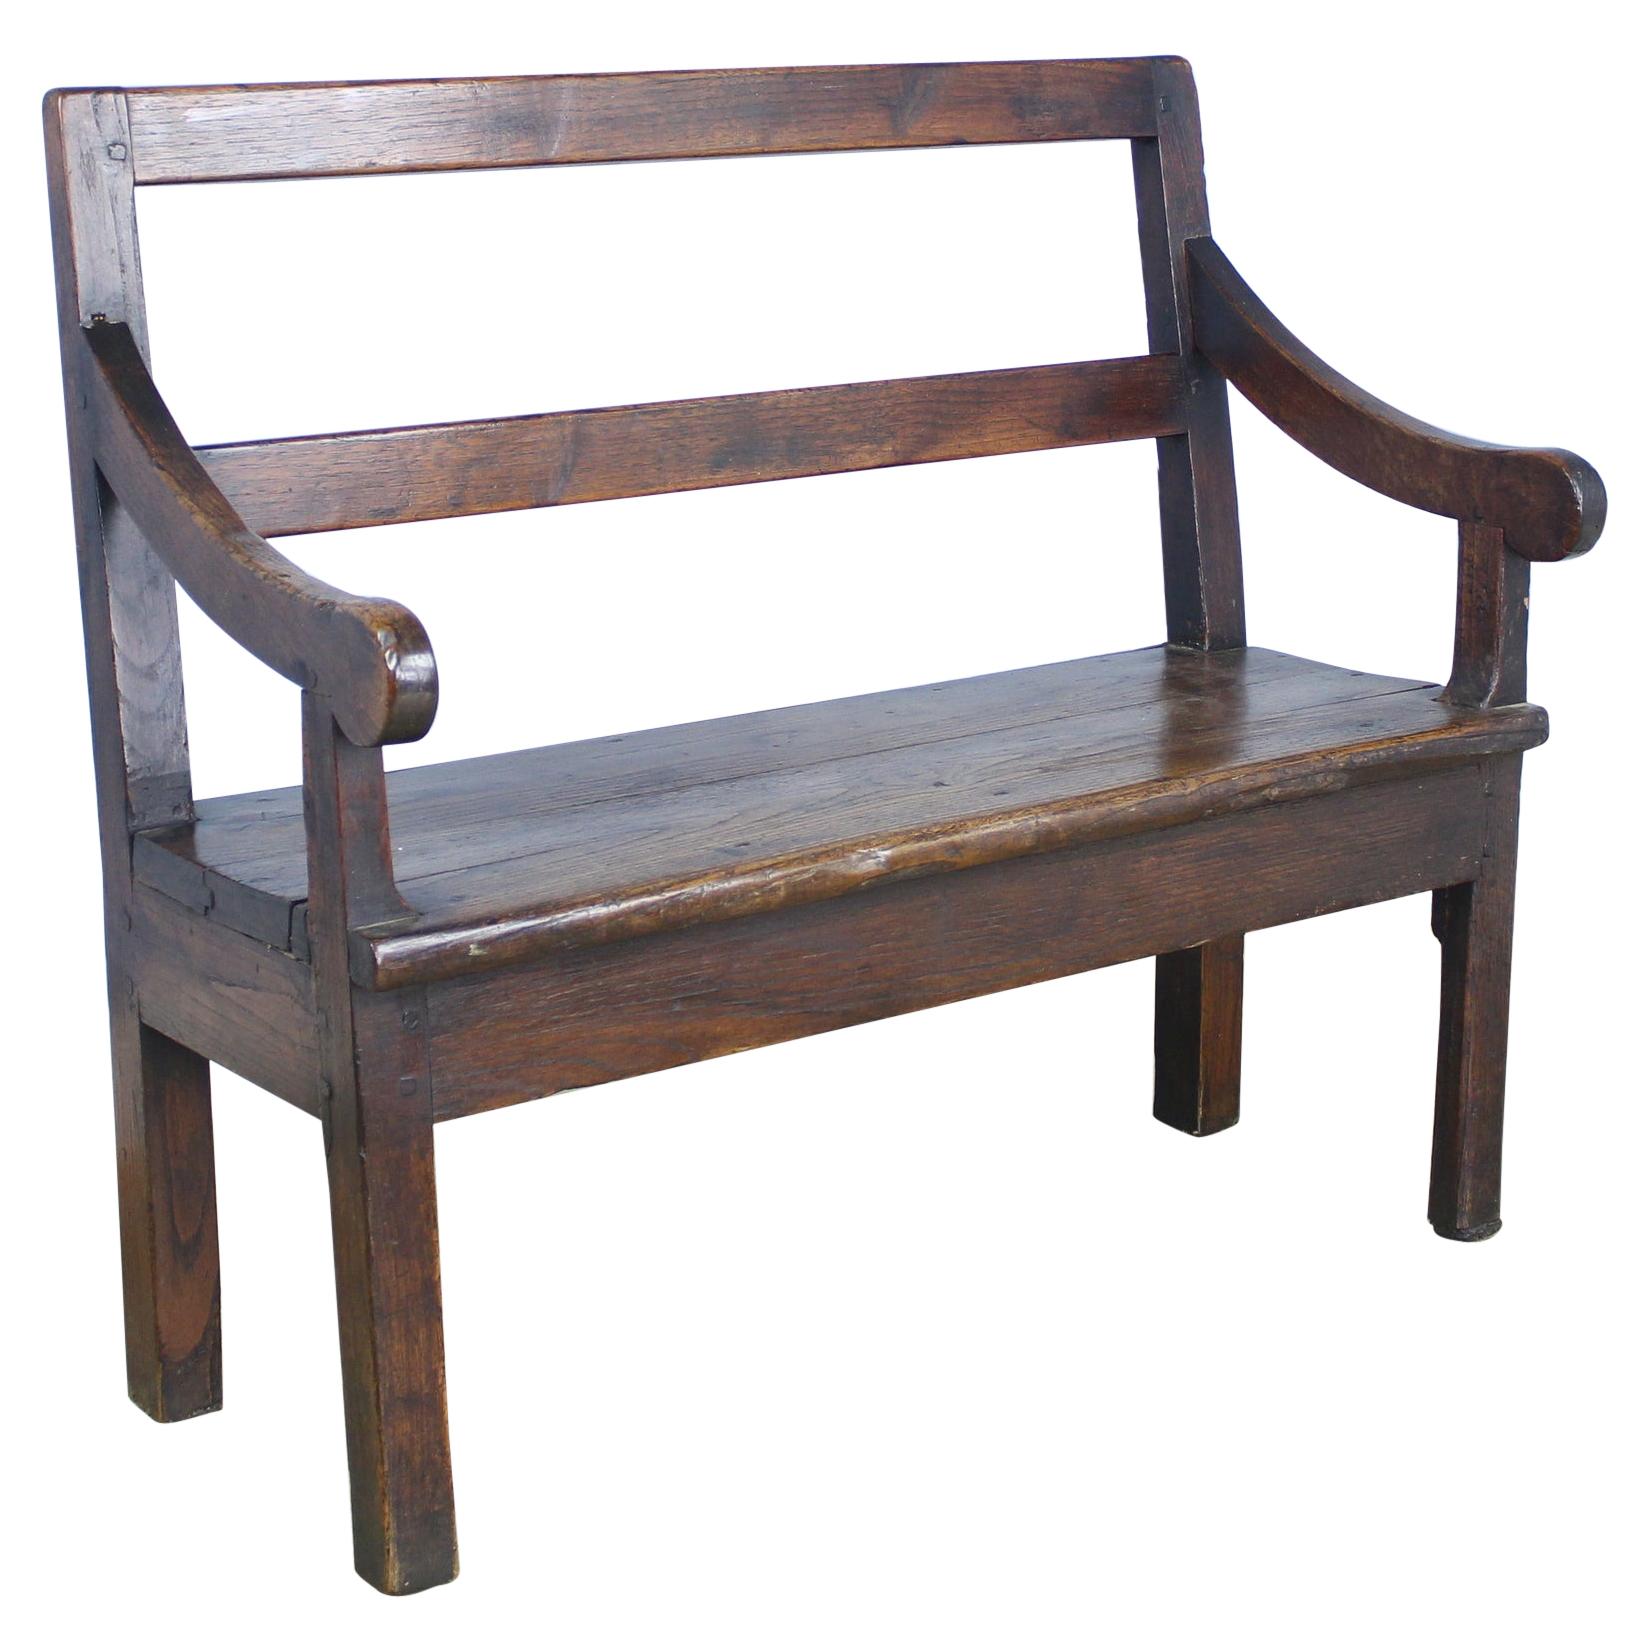 Small French Chestnut Seat or Bench